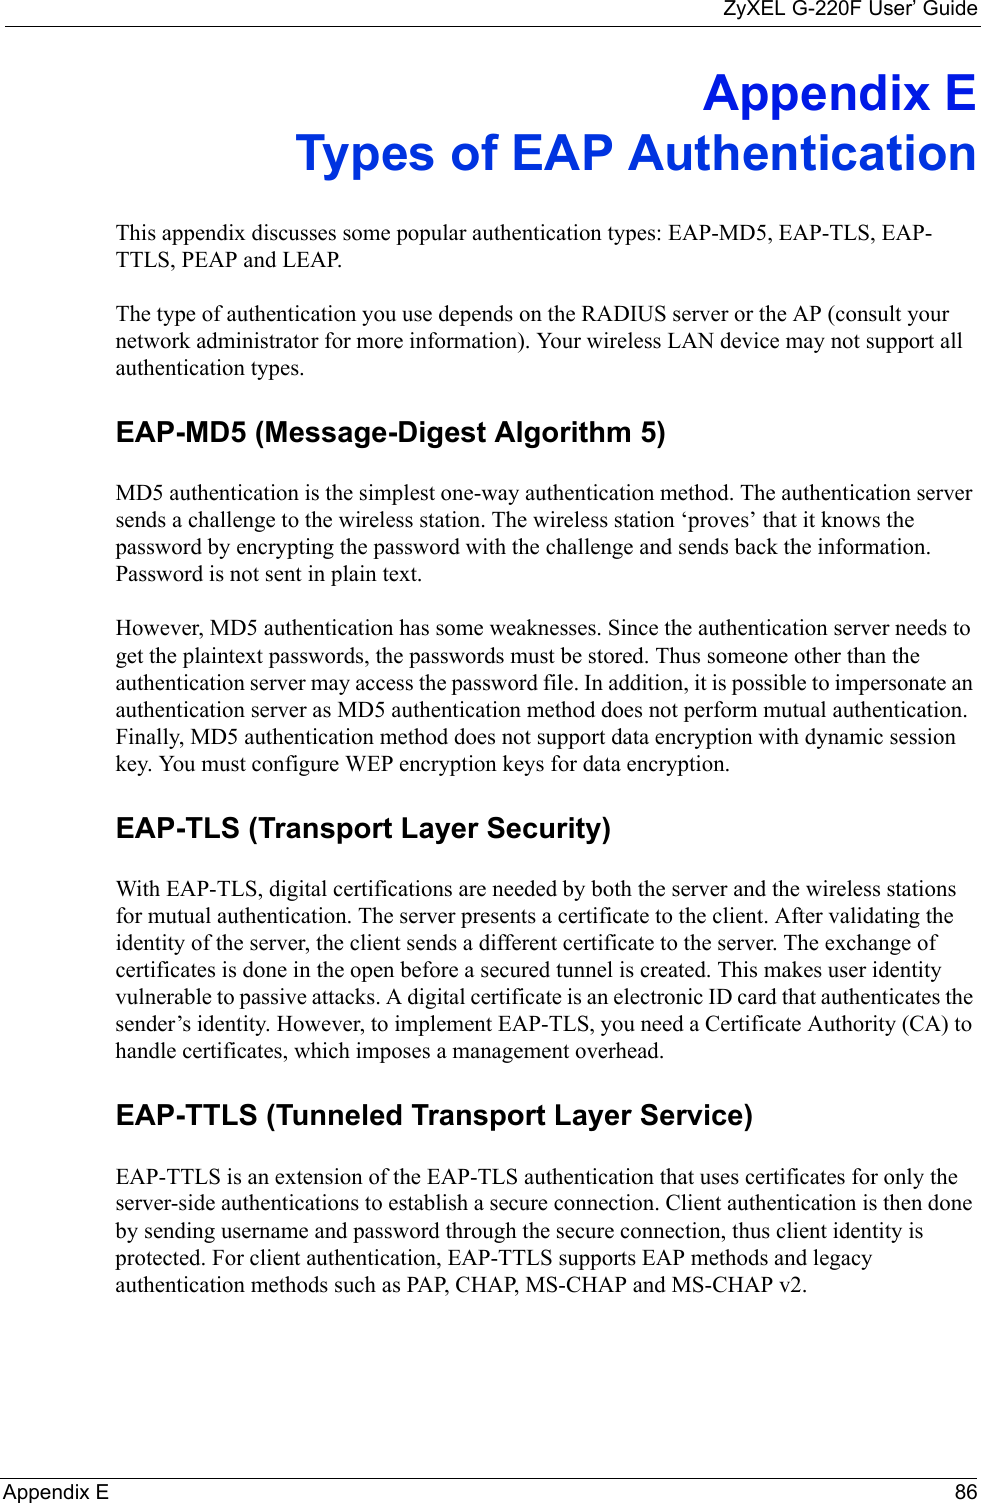 ZyXEL G-220F User’ GuideAppendix E 86Appendix ETypes of EAP AuthenticationThis appendix discusses some popular authentication types: EAP-MD5, EAP-TLS, EAP-TTLS, PEAP and LEAP. The type of authentication you use depends on the RADIUS server or the AP (consult your network administrator for more information). Your wireless LAN device may not support all authentication types. EAP-MD5 (Message-Digest Algorithm 5)MD5 authentication is the simplest one-way authentication method. The authentication server sends a challenge to the wireless station. The wireless station ‘proves’ that it knows the password by encrypting the password with the challenge and sends back the information. Password is not sent in plain text. However, MD5 authentication has some weaknesses. Since the authentication server needs to get the plaintext passwords, the passwords must be stored. Thus someone other than the authentication server may access the password file. In addition, it is possible to impersonate an authentication server as MD5 authentication method does not perform mutual authentication. Finally, MD5 authentication method does not support data encryption with dynamic session key. You must configure WEP encryption keys for data encryption. EAP-TLS (Transport Layer Security)With EAP-TLS, digital certifications are needed by both the server and the wireless stations for mutual authentication. The server presents a certificate to the client. After validating the identity of the server, the client sends a different certificate to the server. The exchange of certificates is done in the open before a secured tunnel is created. This makes user identity vulnerable to passive attacks. A digital certificate is an electronic ID card that authenticates the sender’s identity. However, to implement EAP-TLS, you need a Certificate Authority (CA) to handle certificates, which imposes a management overhead. EAP-TTLS (Tunneled Transport Layer Service) EAP-TTLS is an extension of the EAP-TLS authentication that uses certificates for only the server-side authentications to establish a secure connection. Client authentication is then done by sending username and password through the secure connection, thus client identity is protected. For client authentication, EAP-TTLS supports EAP methods and legacy authentication methods such as PAP, CHAP, MS-CHAP and MS-CHAP v2. 